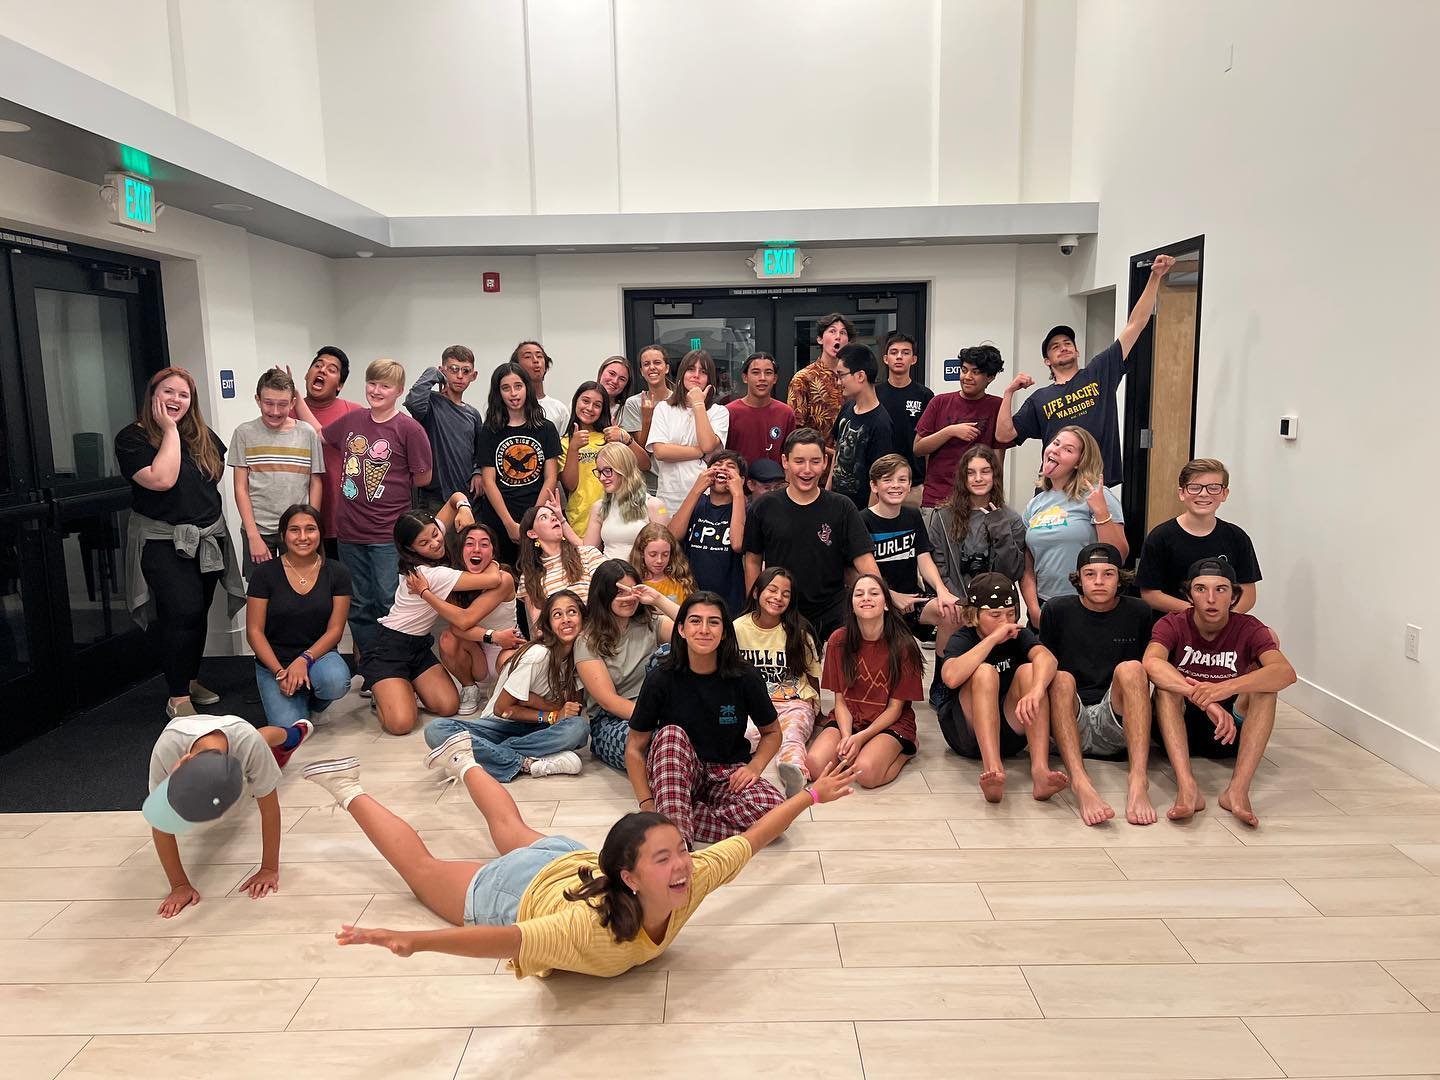 The Lock In was a beautiful success! So much fun, so much food, games, and SUUGGGAAAARRR
To the Parents of those who came: How soon, after you picked them up, did they fall asleep? And for how long?? 

Special thanks to those who volunteered to help 